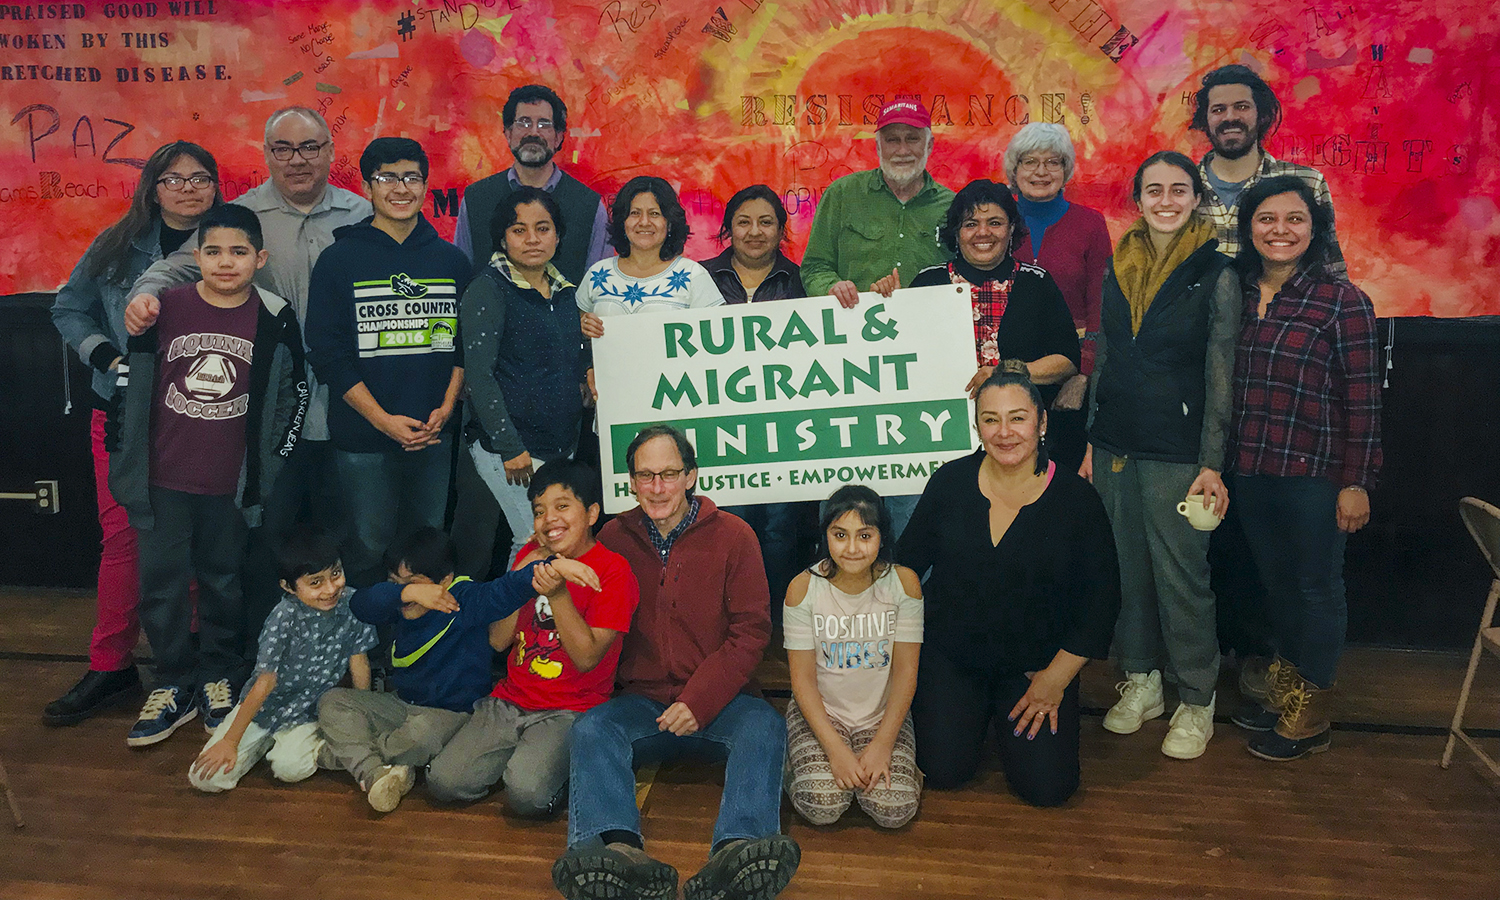 group photo with sign that says "Rural and Migrant Ministries"